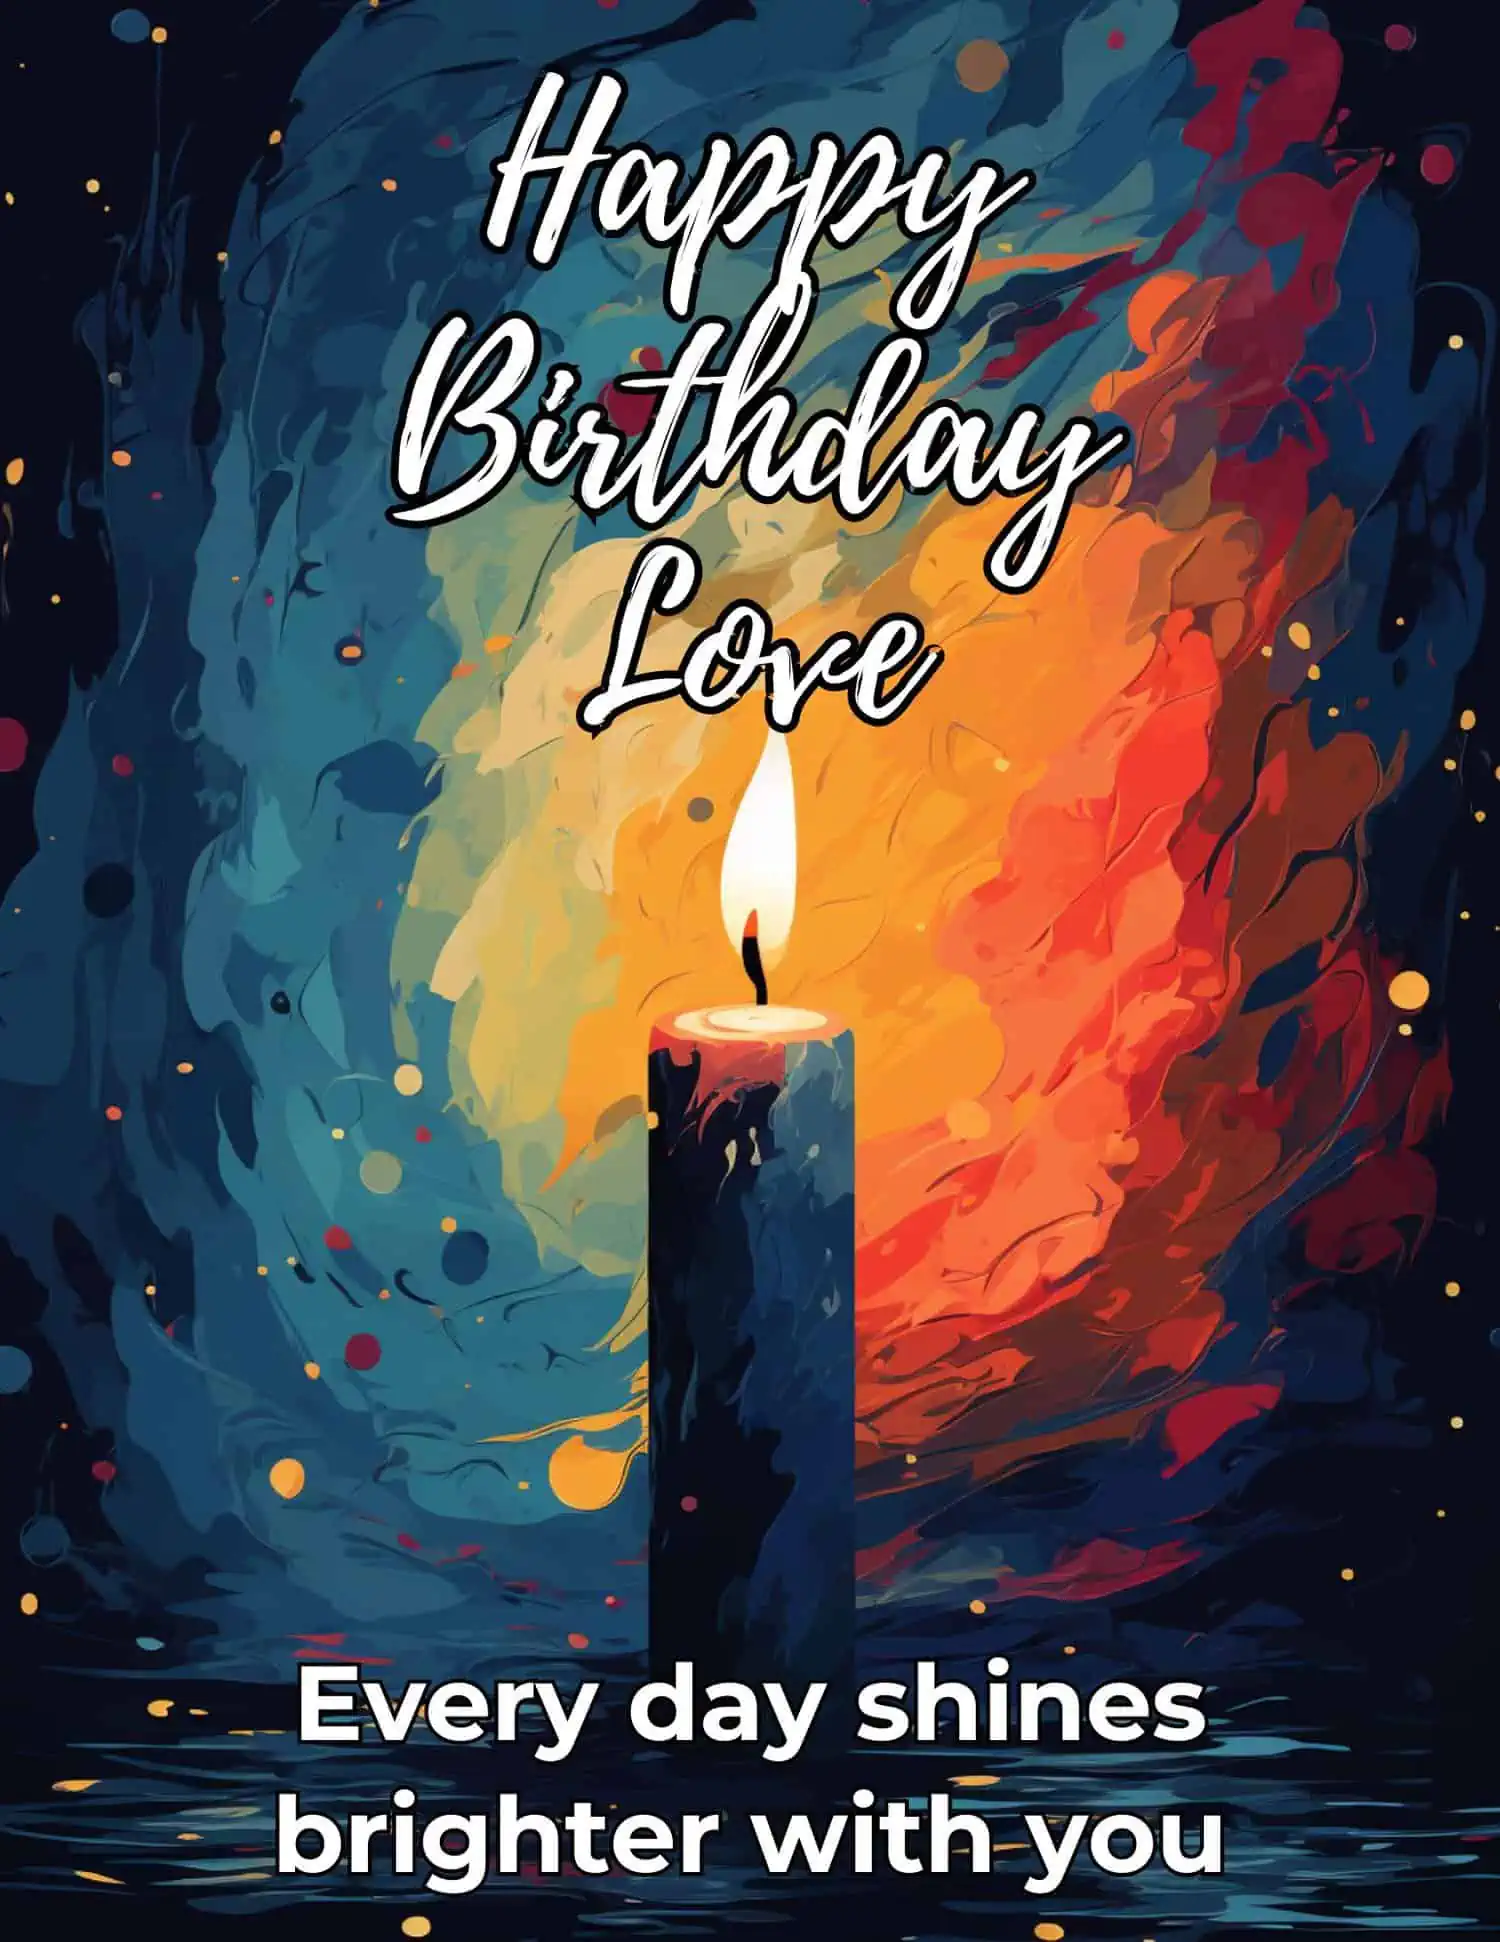 An assortment of concise birthday wishes that pack a punch of affection, perfect for a boyfriend who appreciates the sentiment without the fluff.